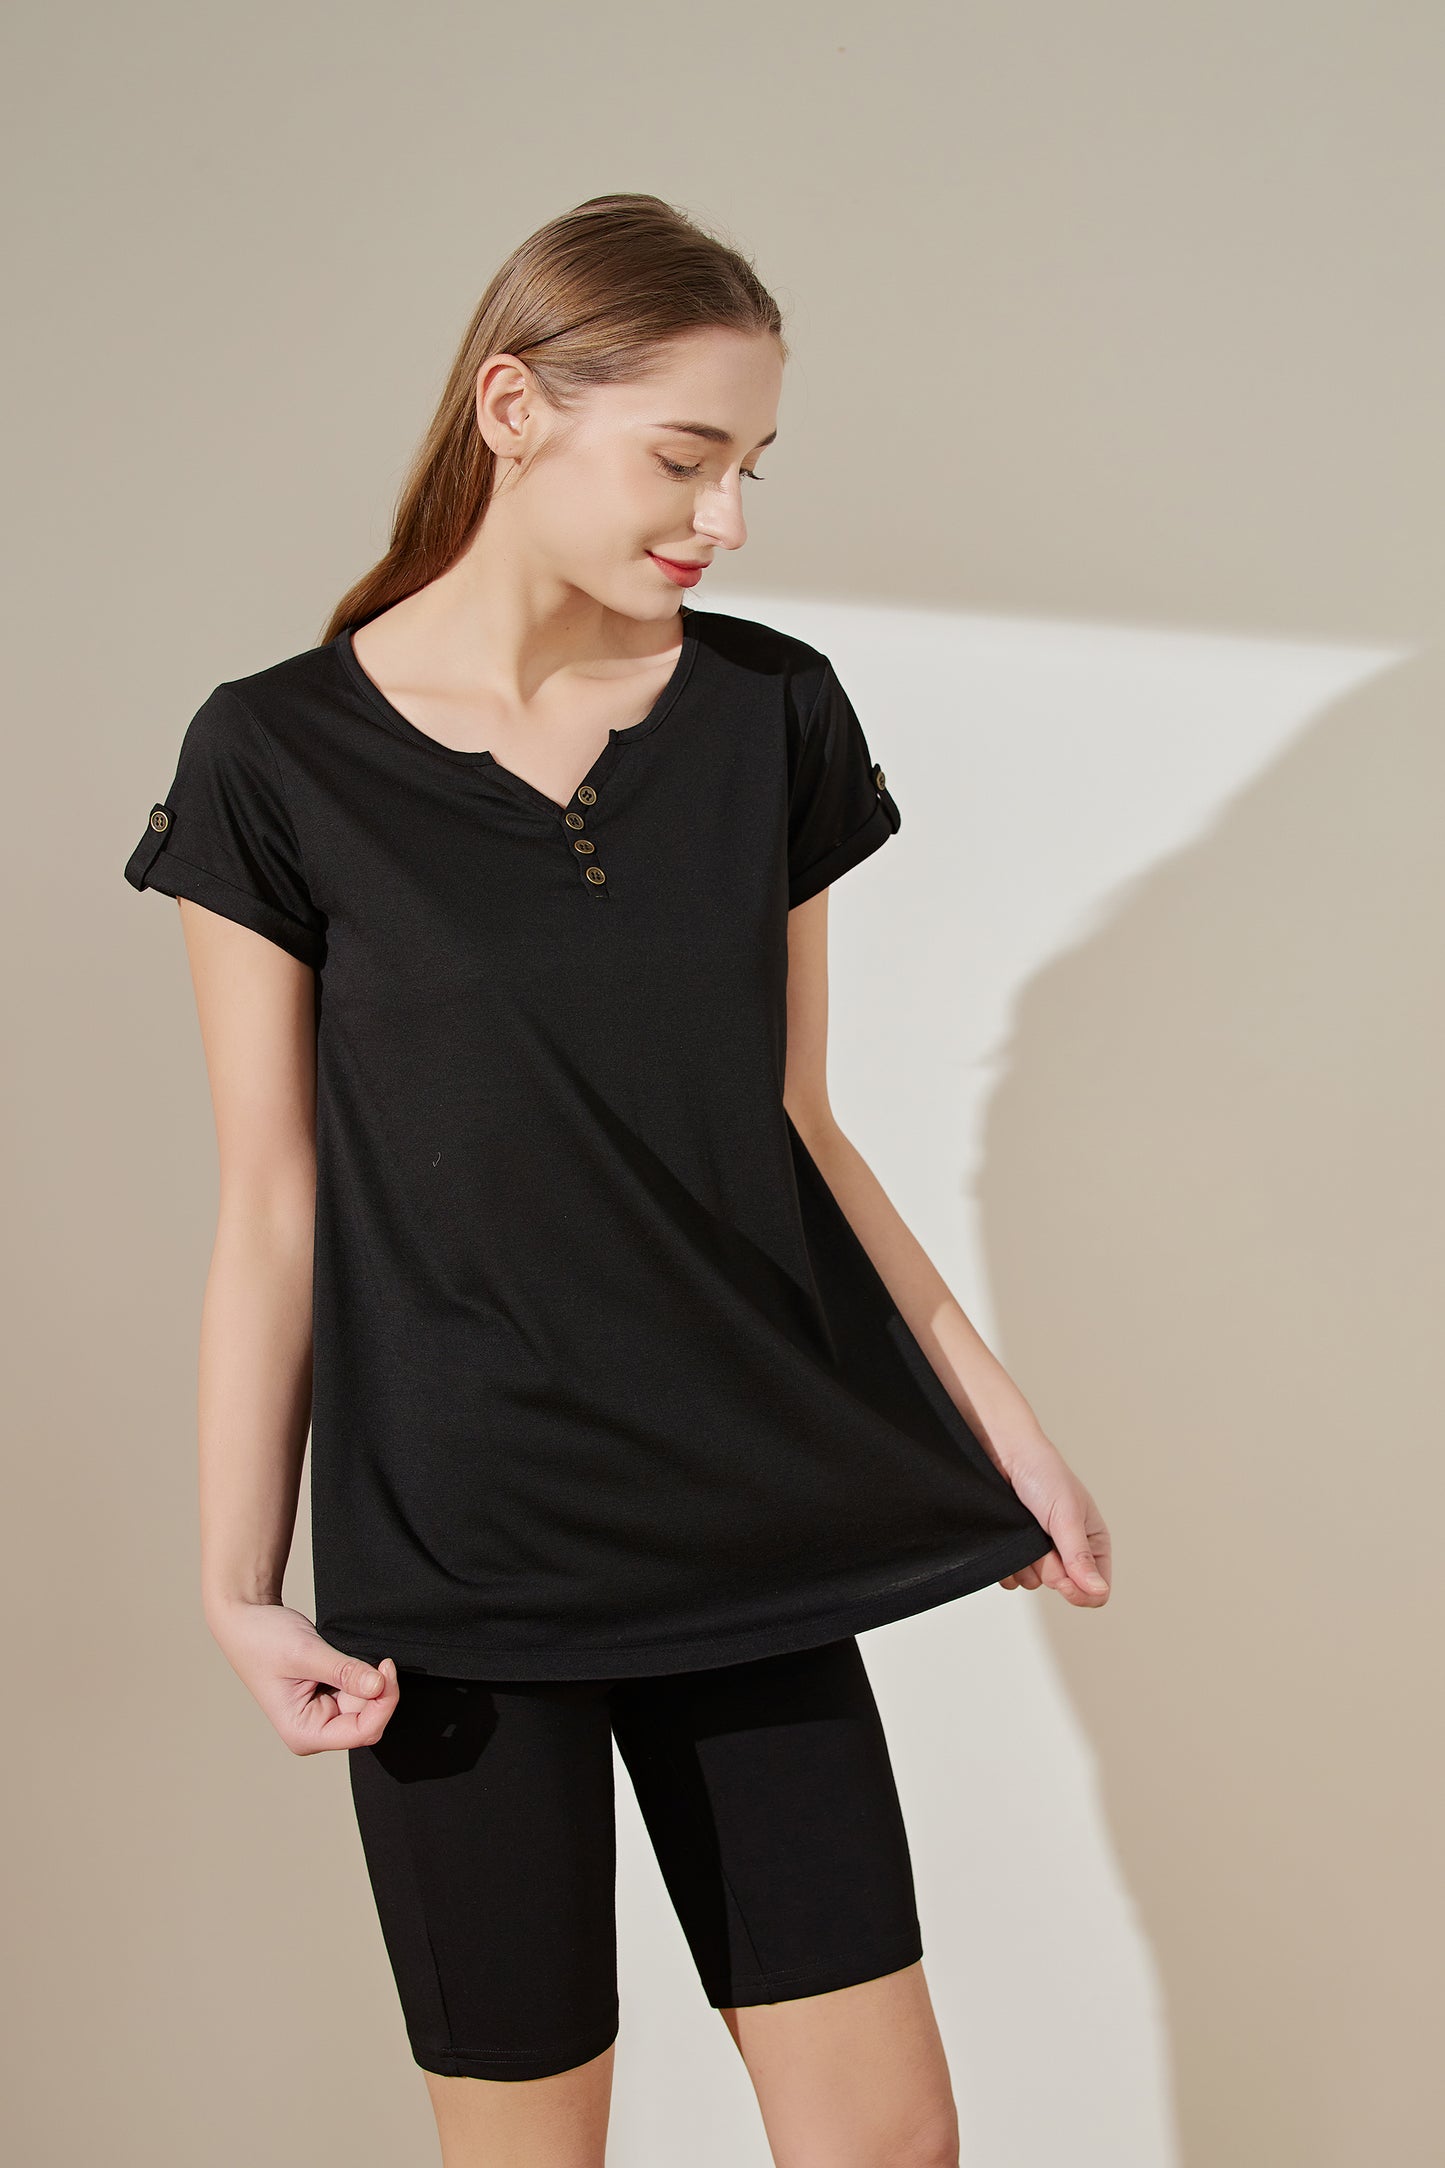 Plus size - short sleeve shirt with Button front neck and button on turned cuff